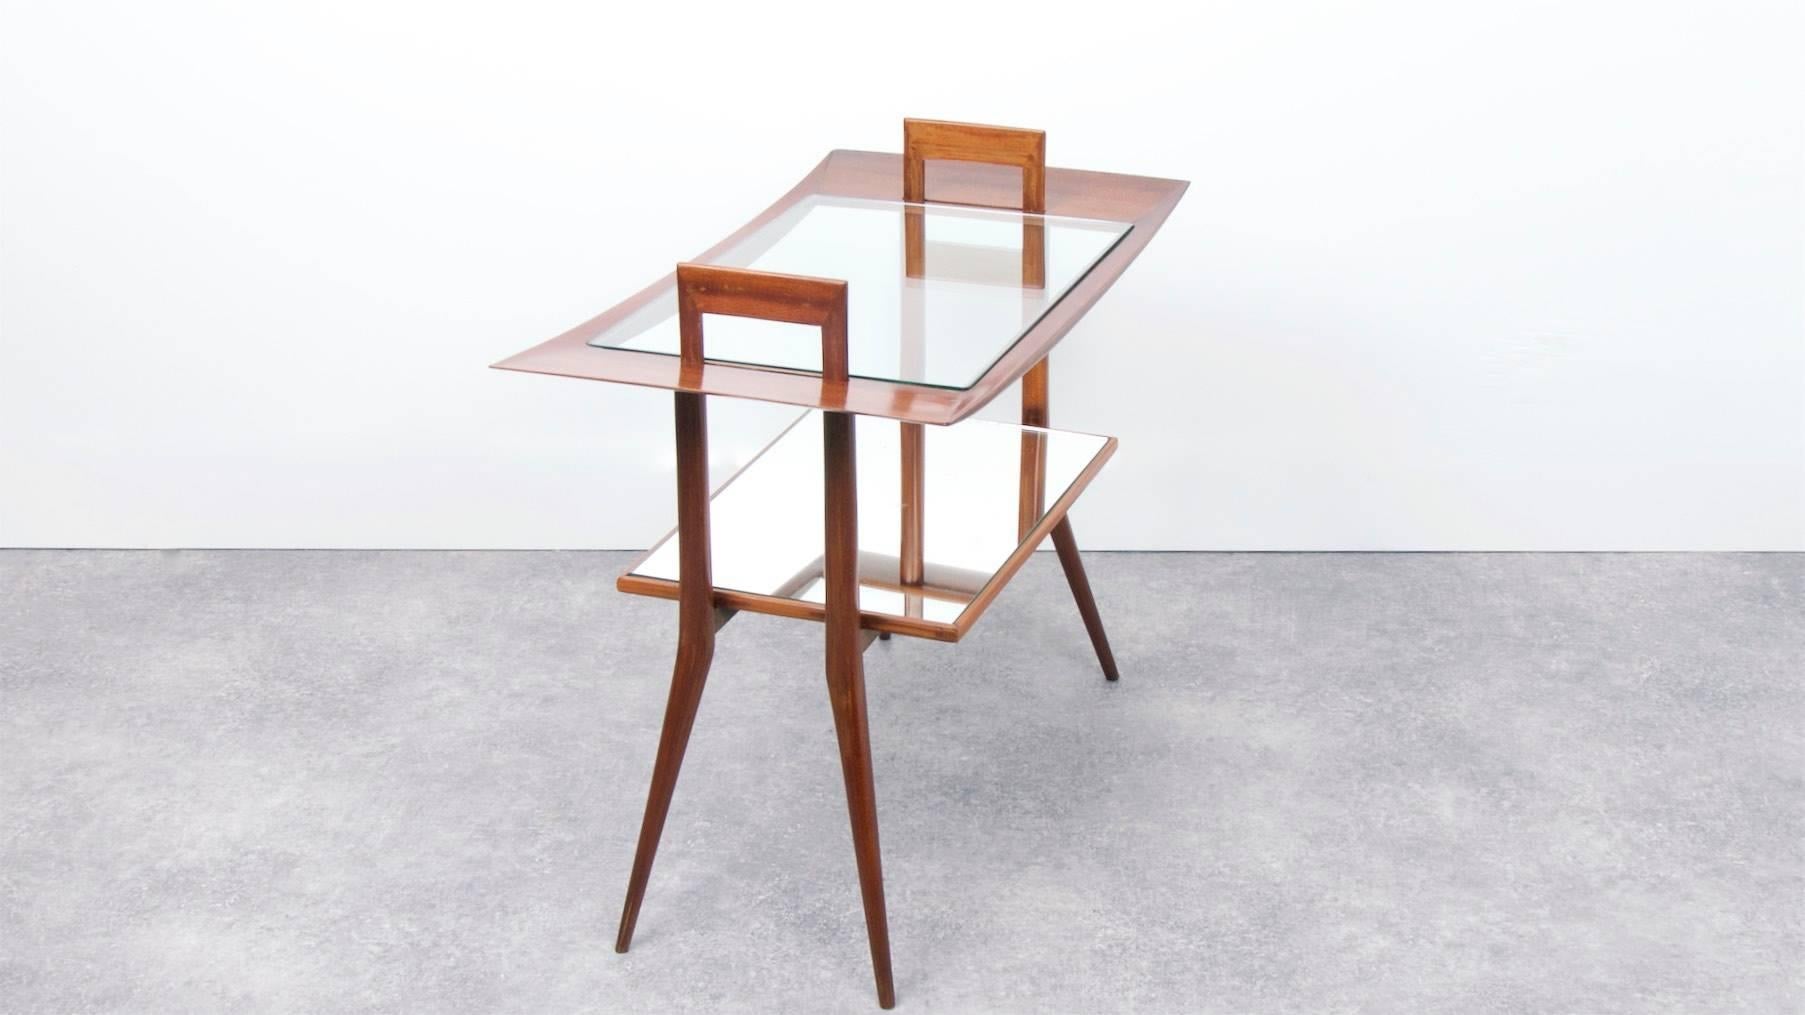 Carlo Enrico Rava very elegant tray table in teak, glass and mirrored glass. The tray can be removed for service.